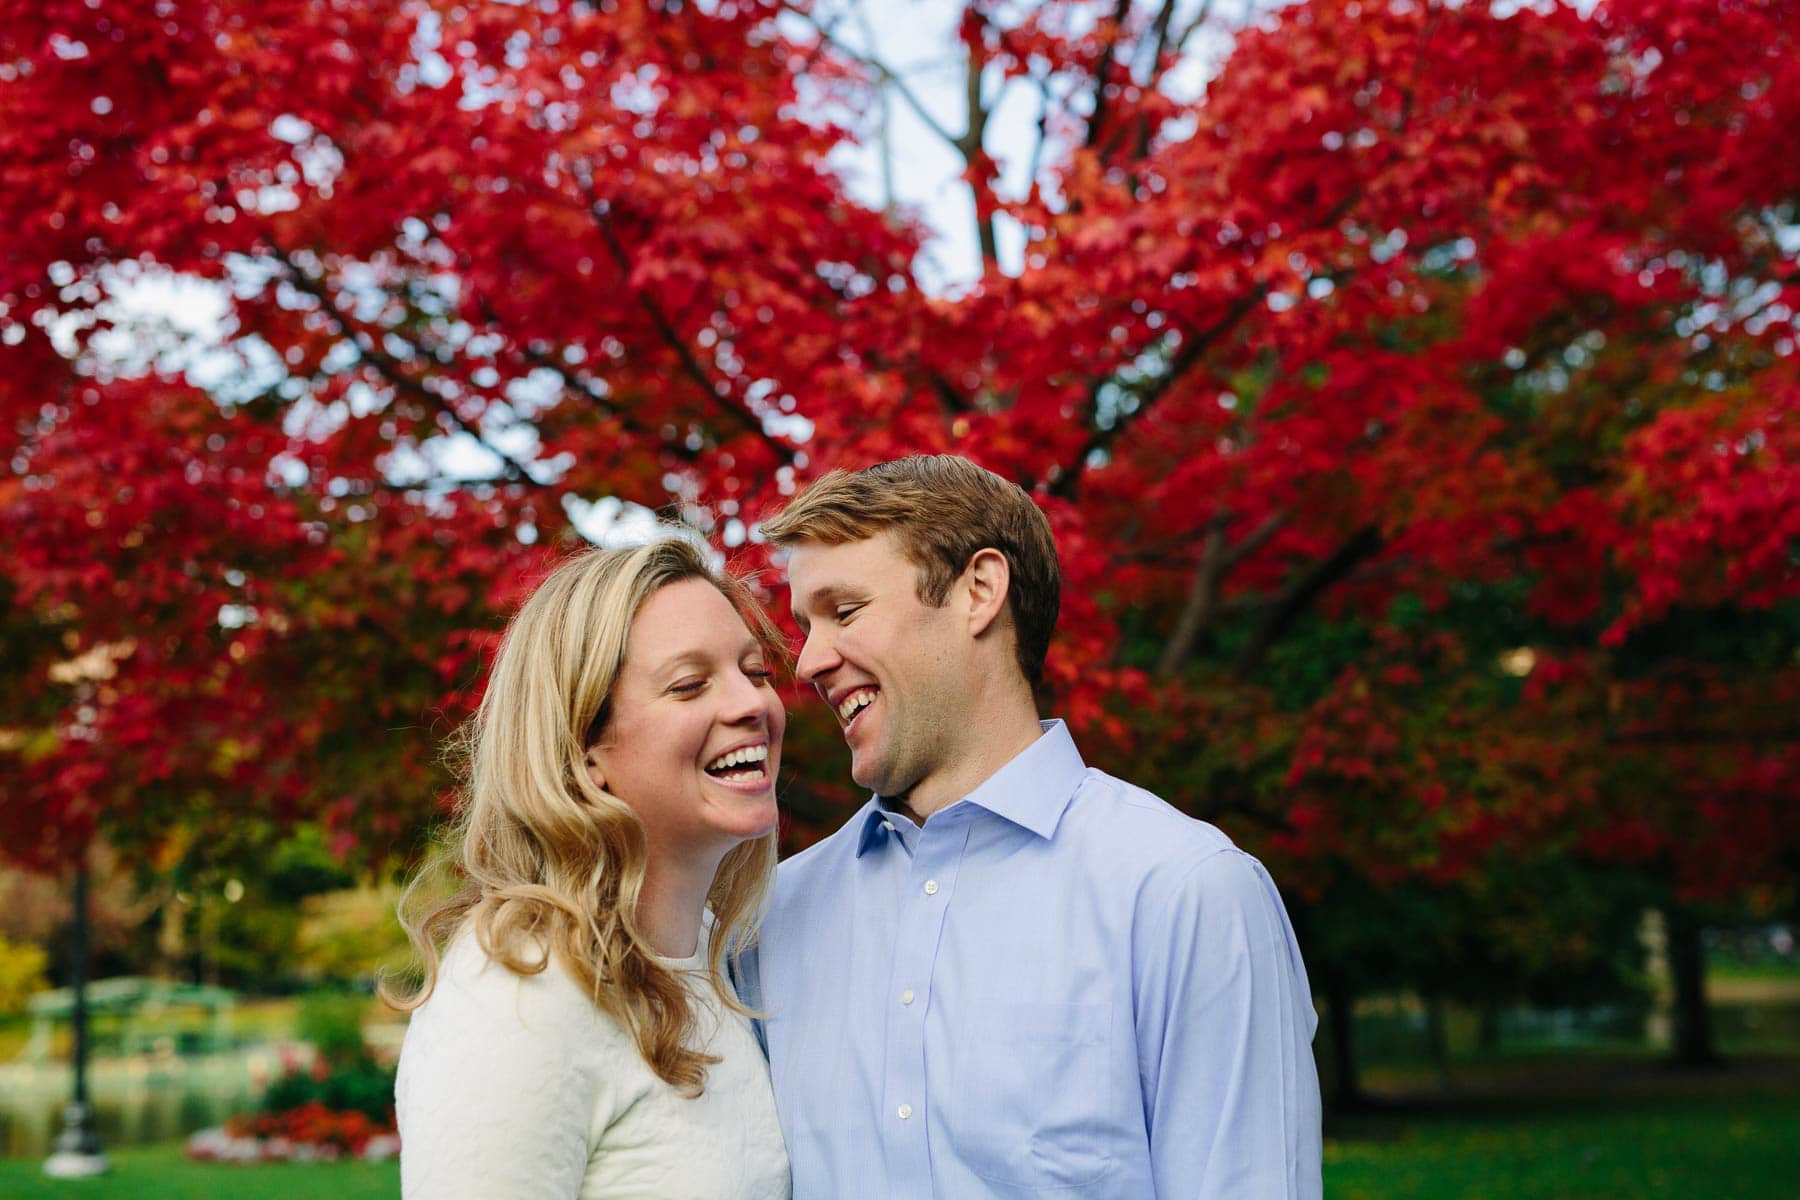 Fall Boston Public Garden engagement photo with brilliant red foliage